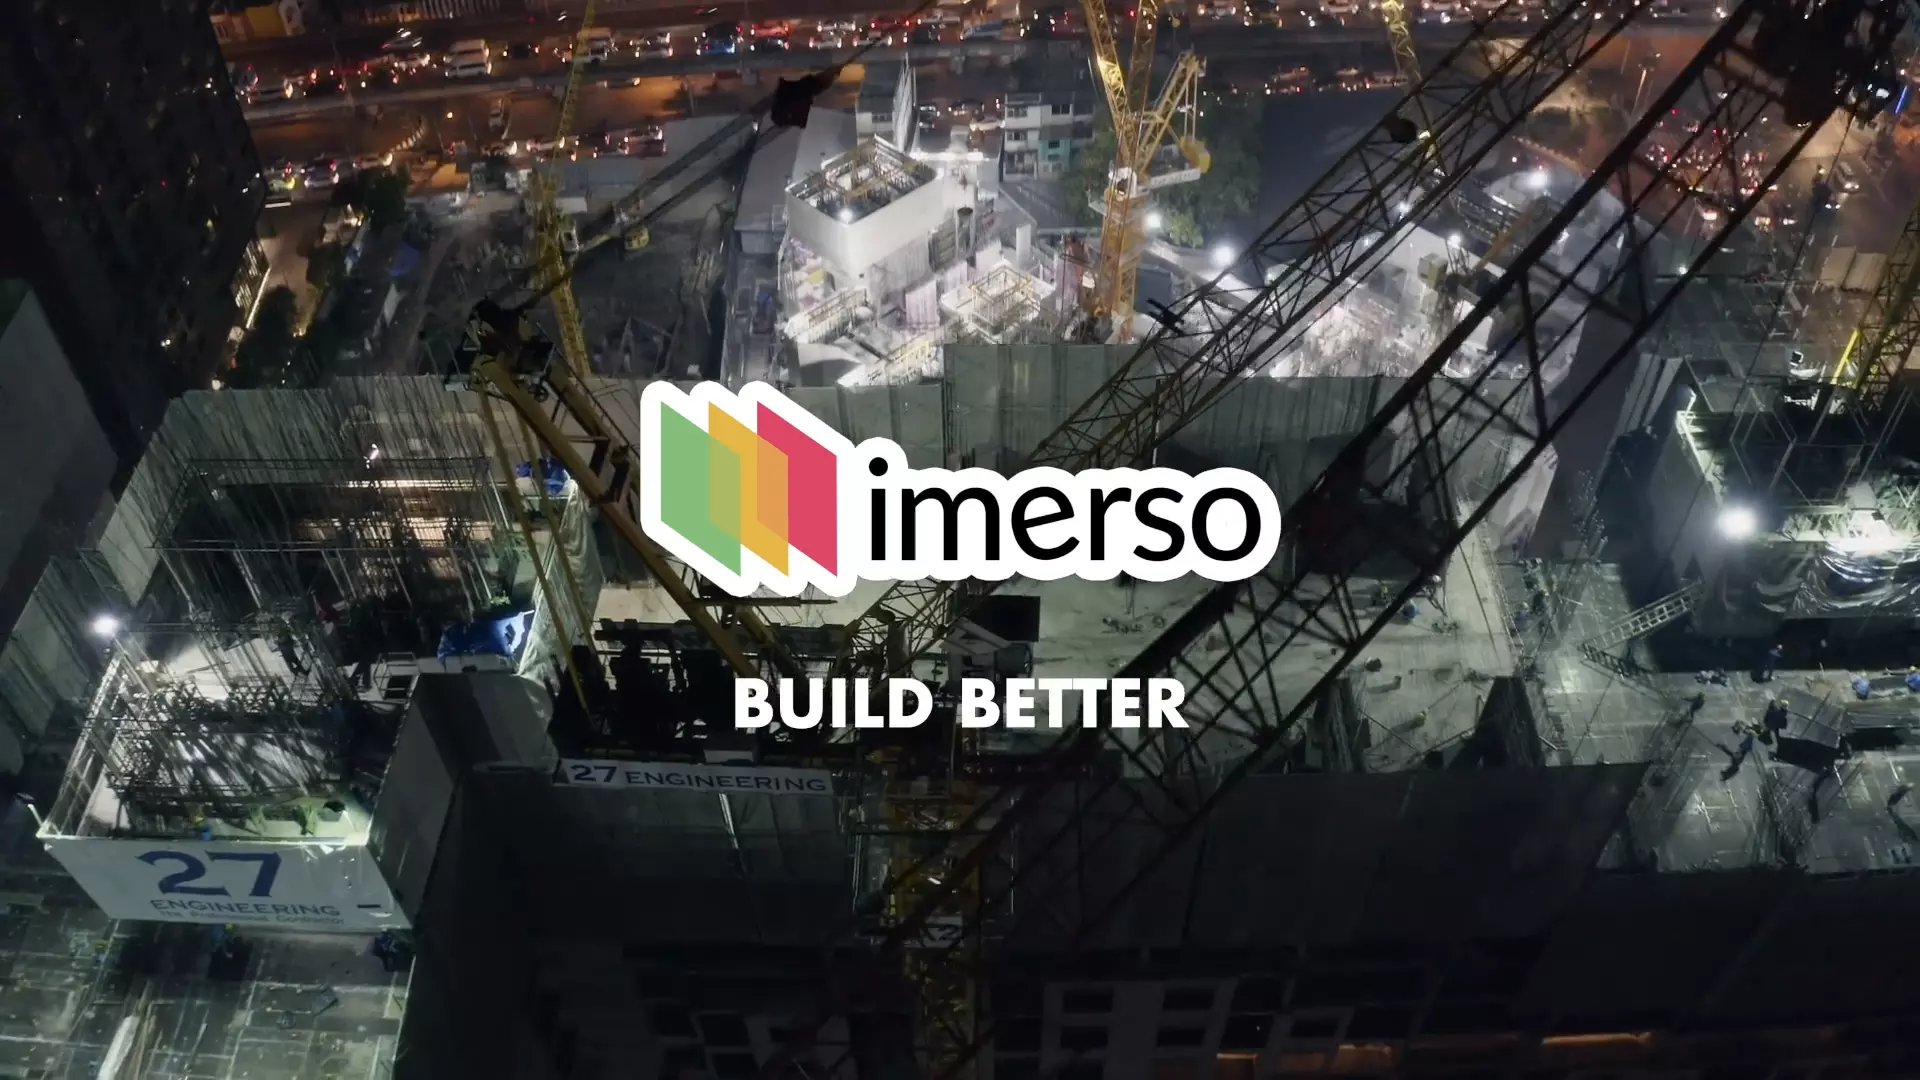 Imerso product video showcasing its capabilities: upload of BIM files, 3D scan of a construction site, inspection mode, surface analysis, etc